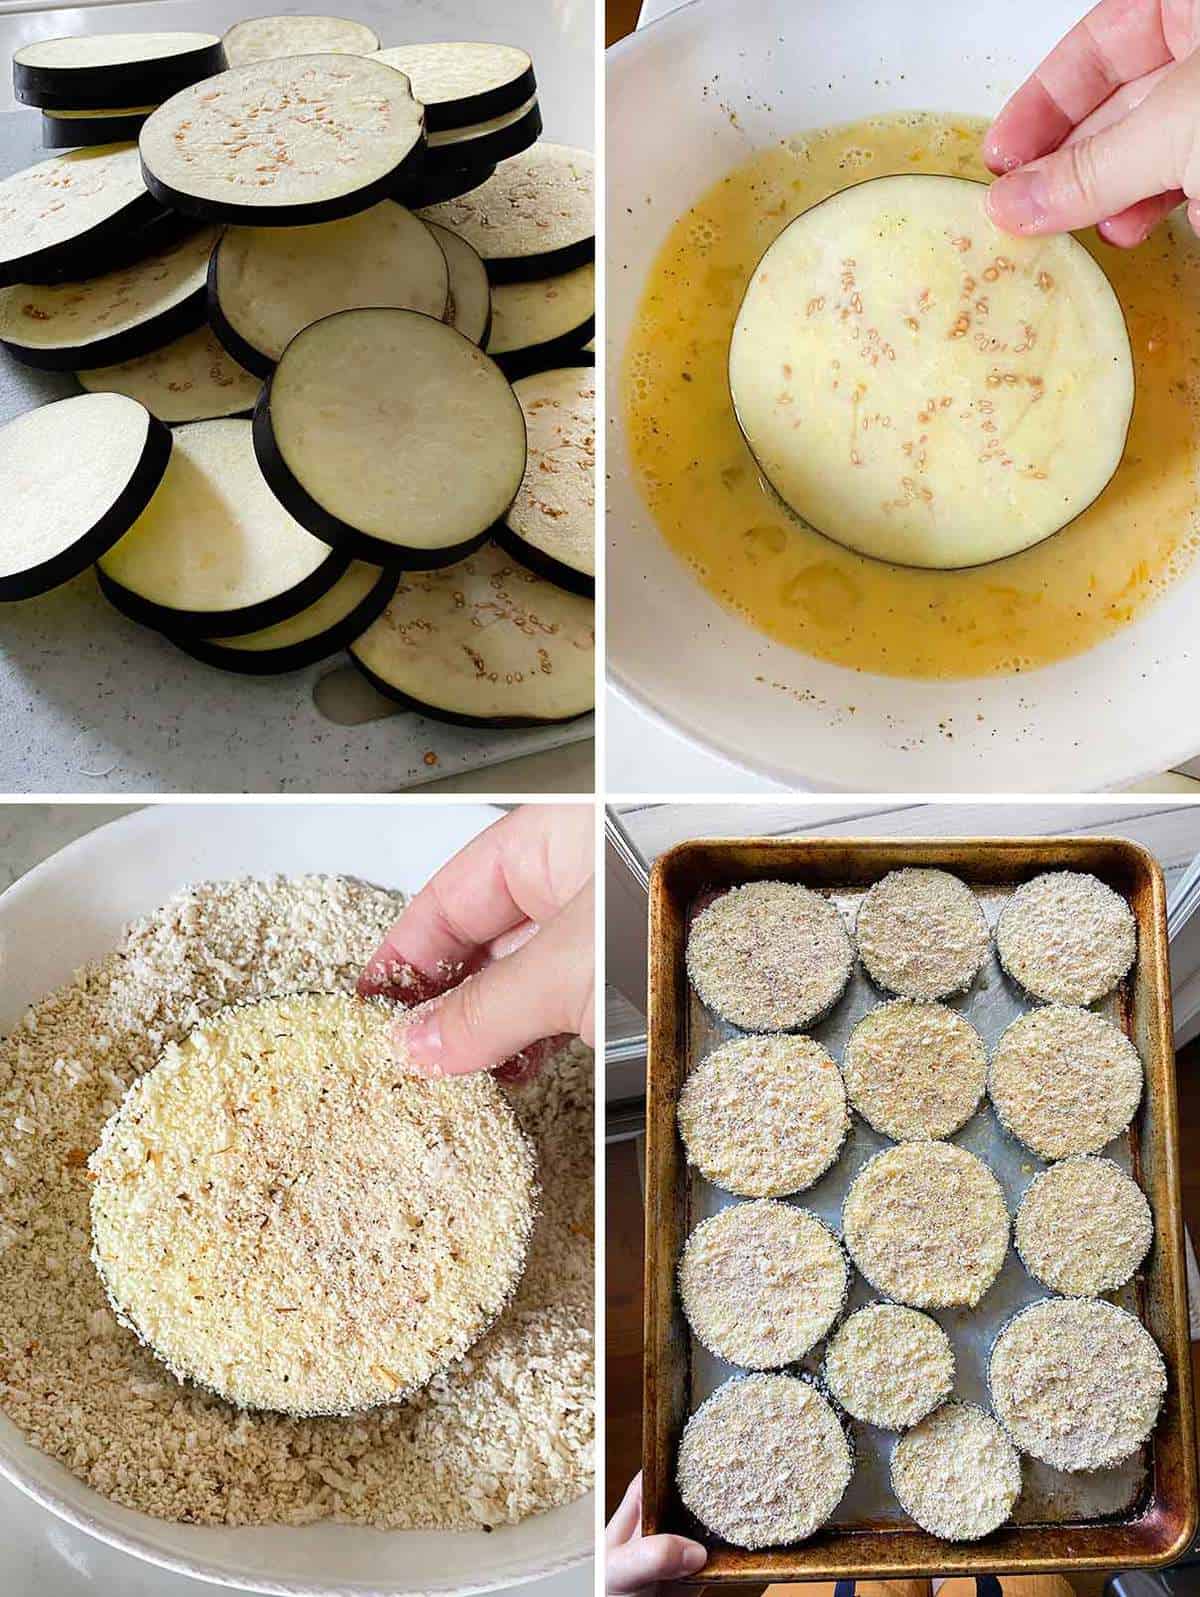 Process collage showing how to bread eggplant slices in panko breadcrumbs and roast.